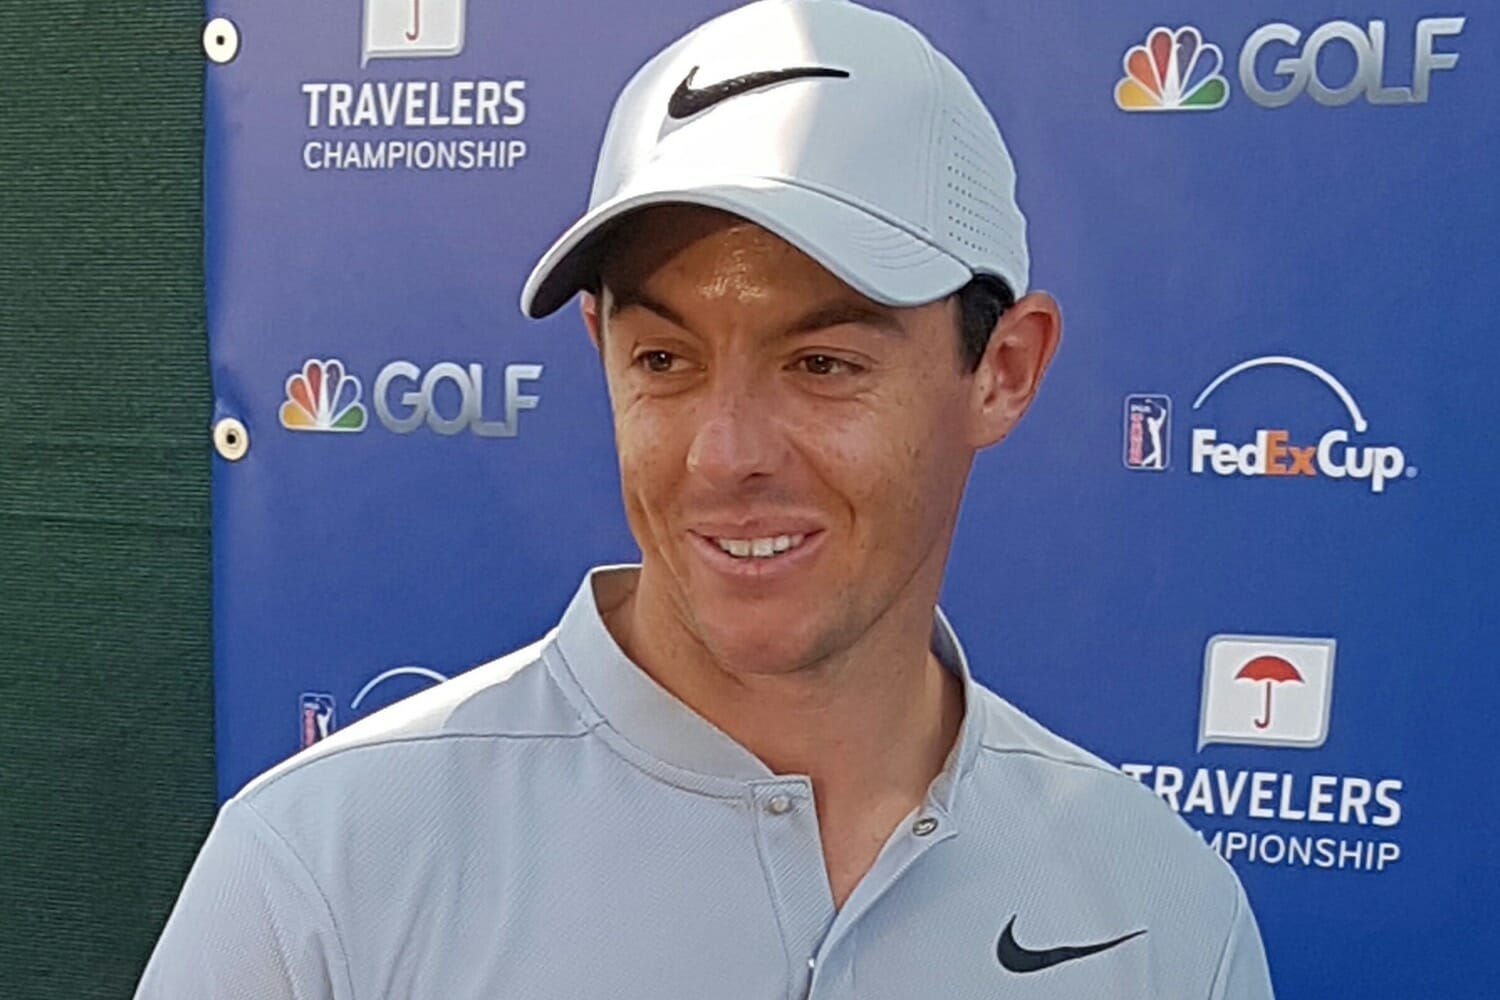 Greens frustration has McIlroy joking about Dad’s putter